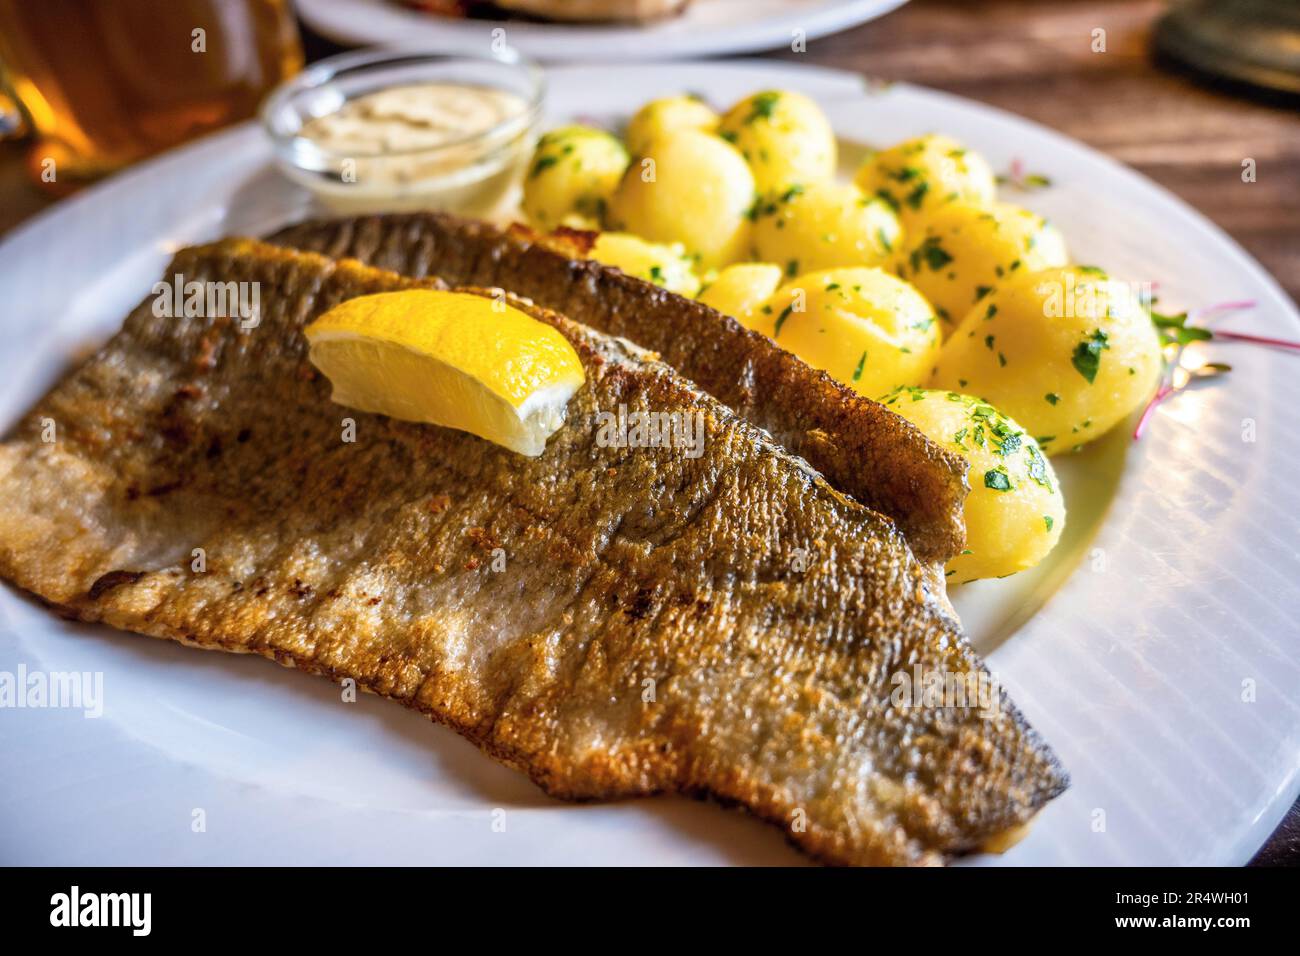 Golden fried zander fish with potato and tartar sauce, beer at restaurant table. Stock Photo